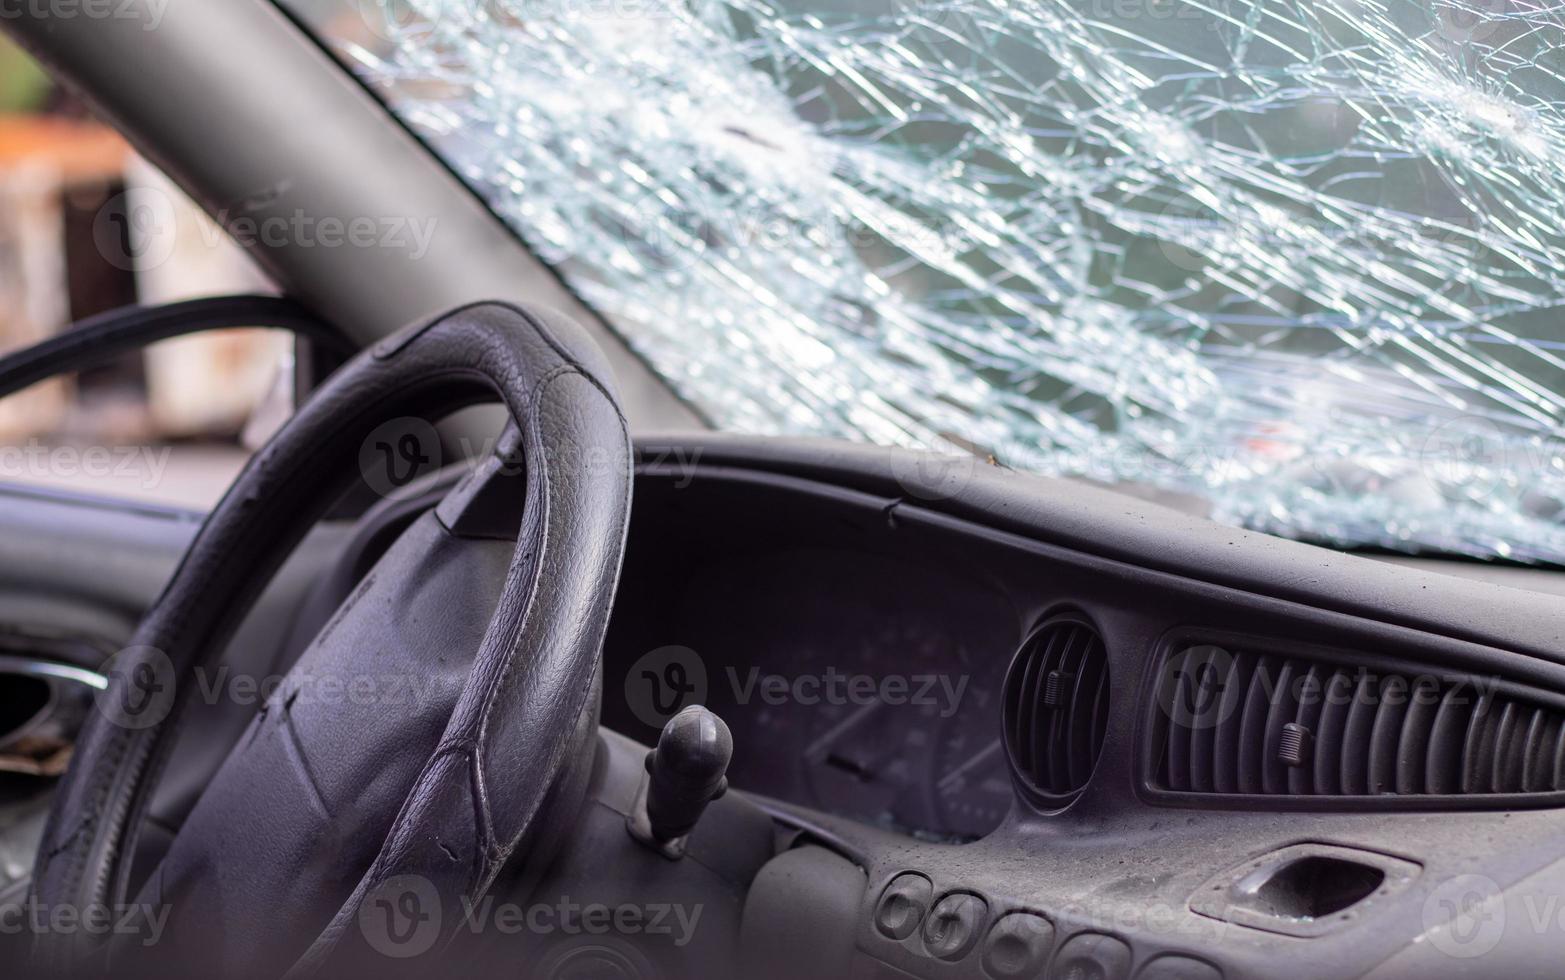 Close-up of the steering wheel of a car after an accident. The driver's airbags did not deploy. Soft focus. Broken windshield with steering wheel. Vehicle interior. Black dashboard and steering wheel. photo